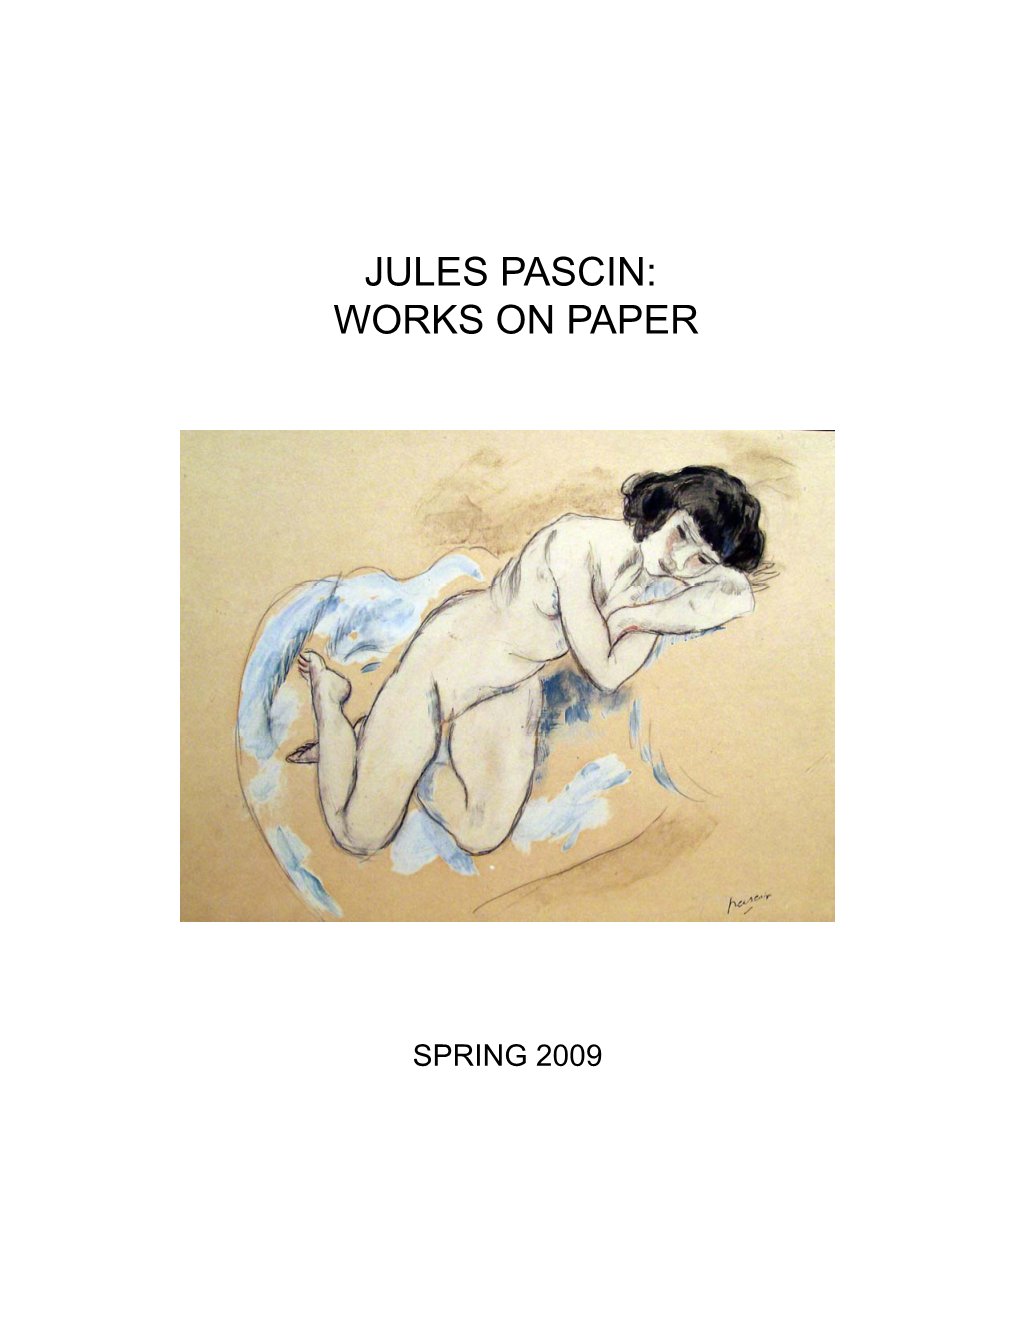 Jules Pascin: Works on Paper